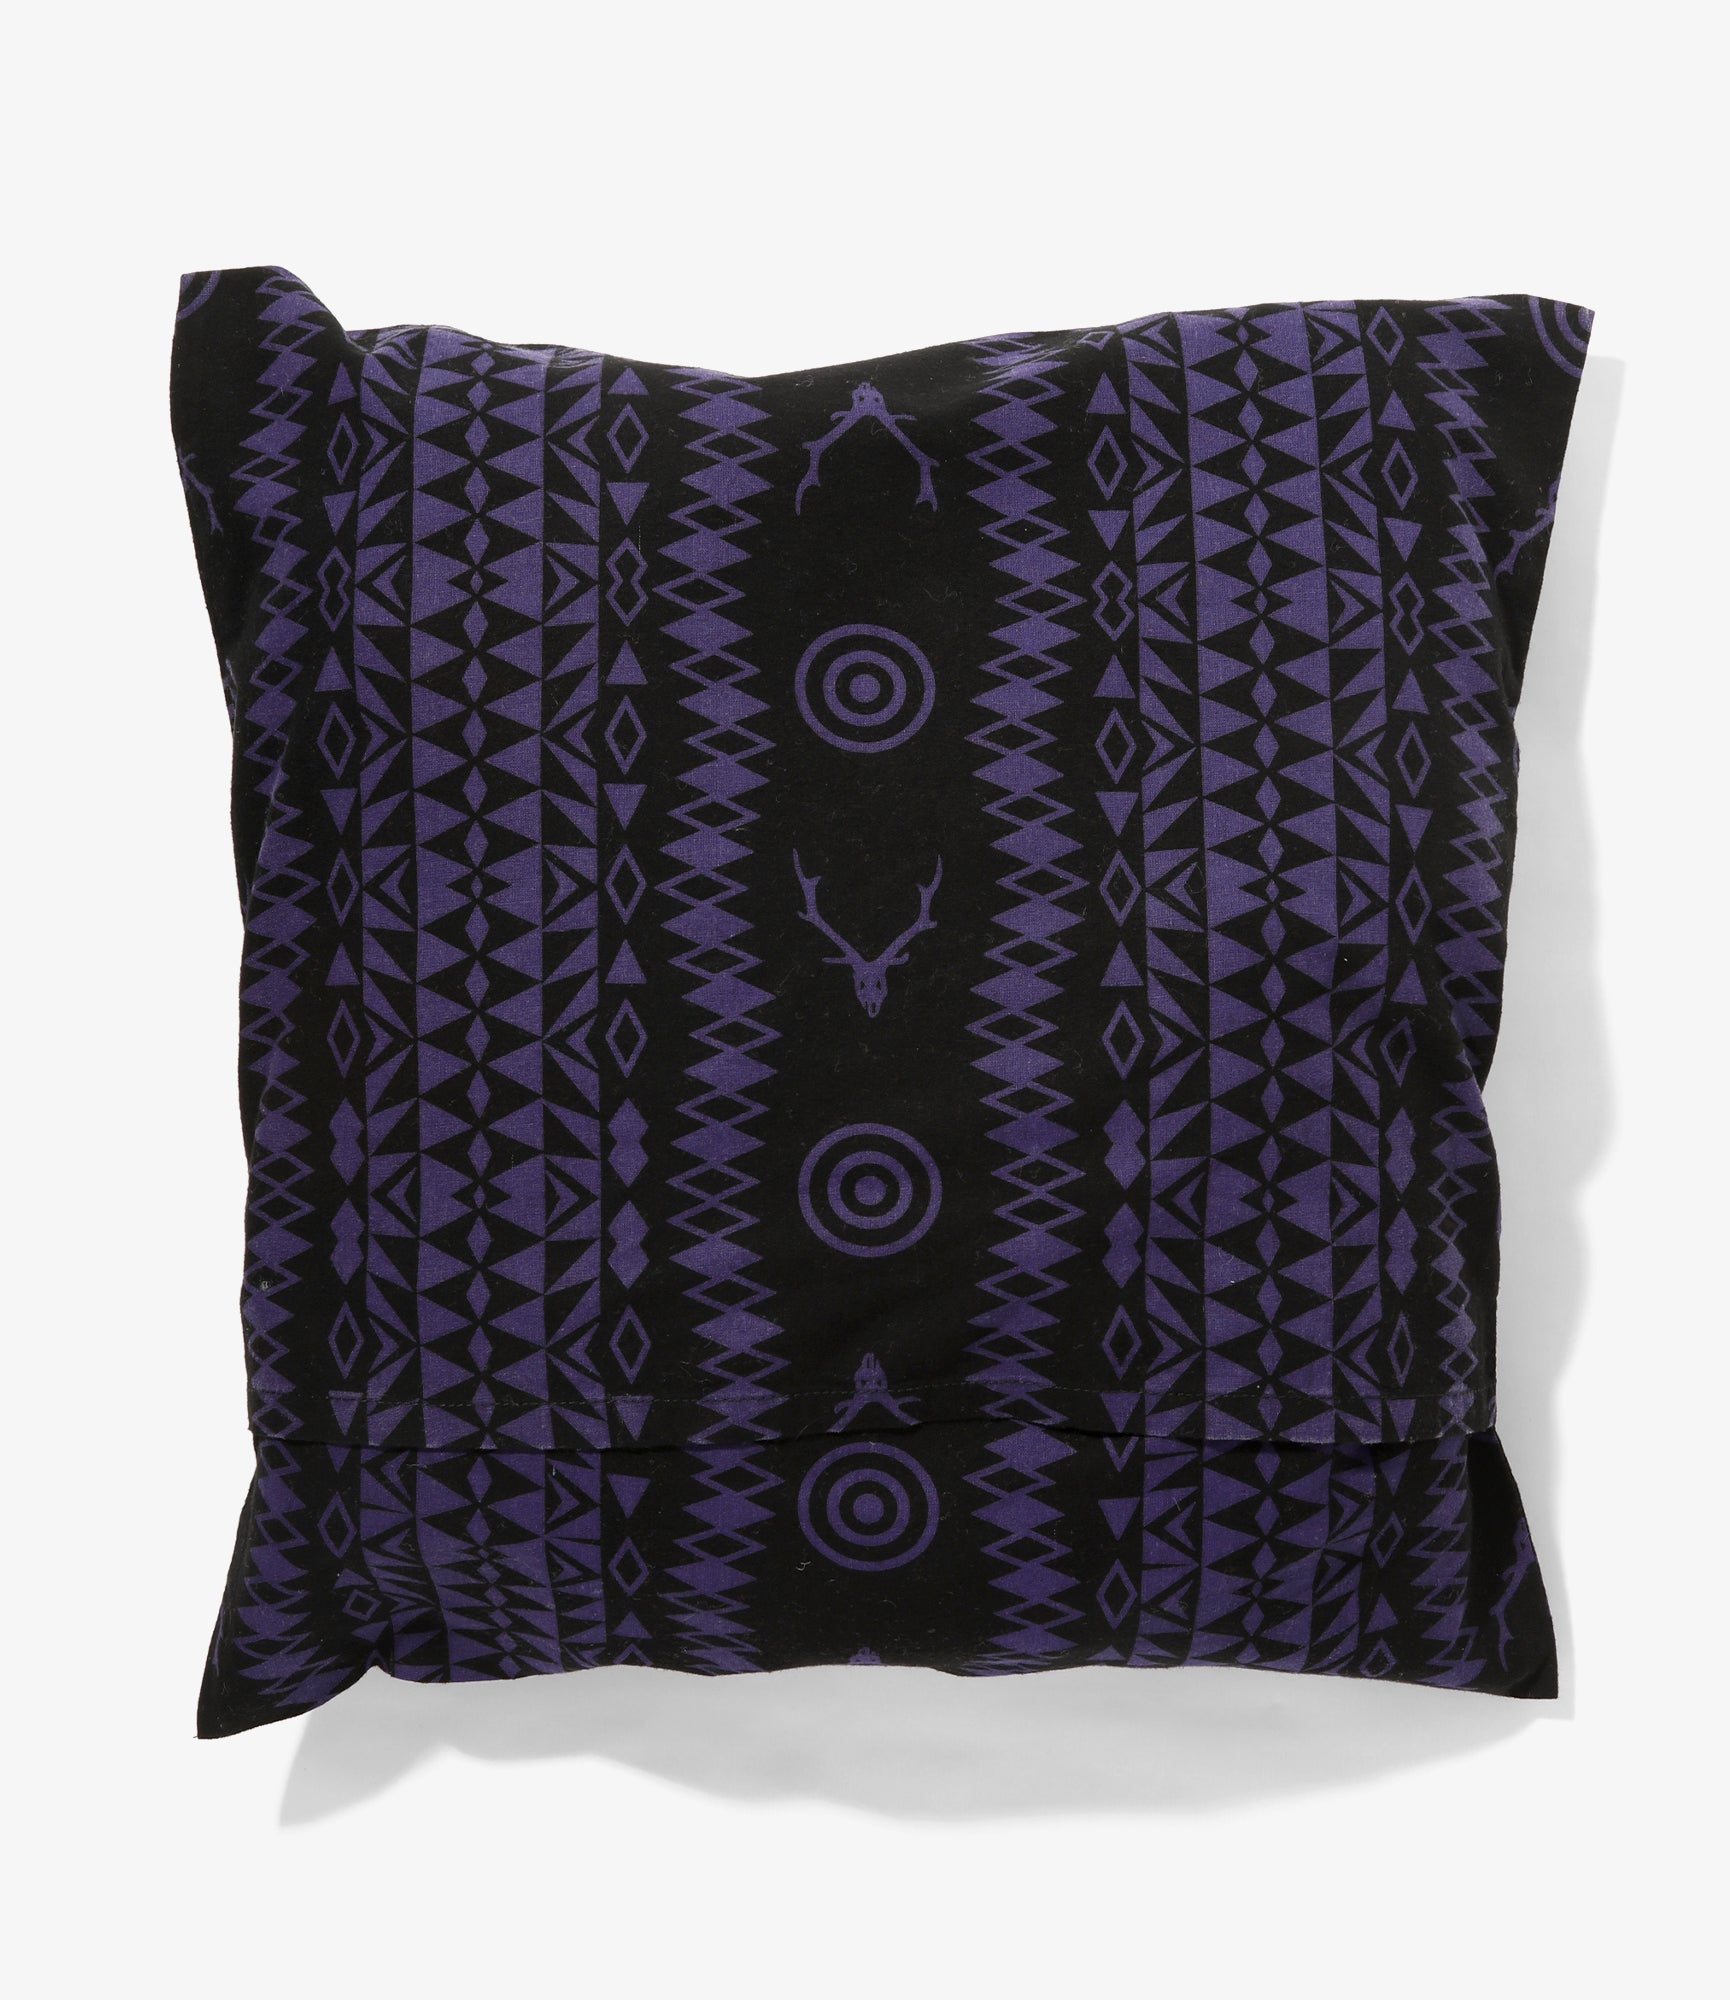 South2 West8 Cushion Cover - Flannel Cloth / Printed - Skull&Target